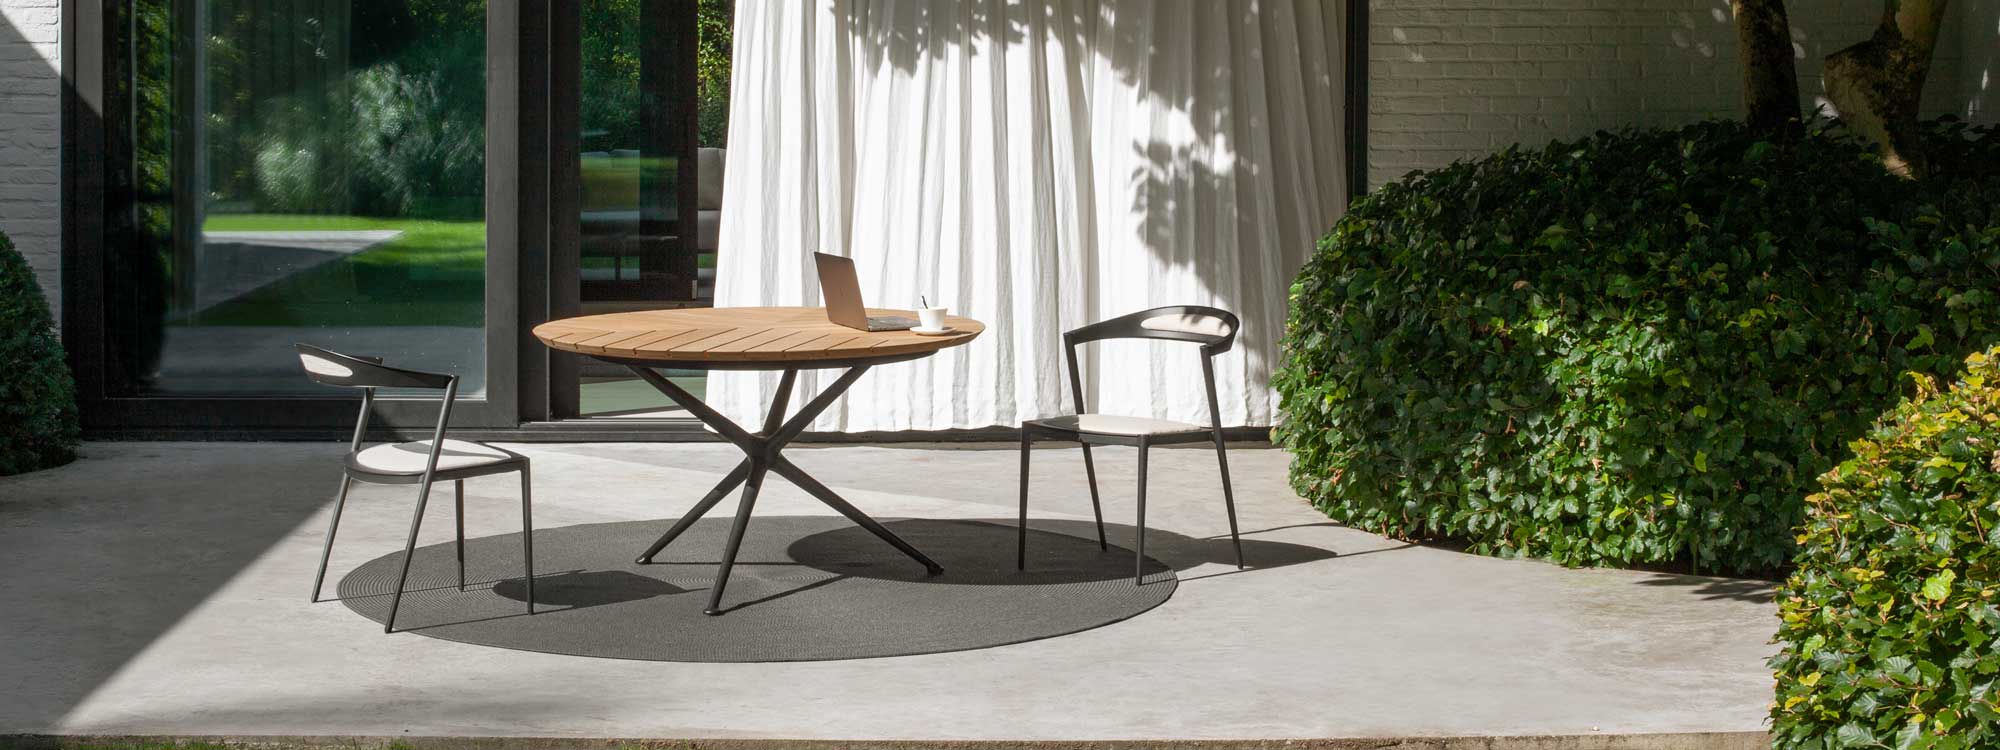 Image of circular Exes table with teak table top and Styletto chair by Royal Botania